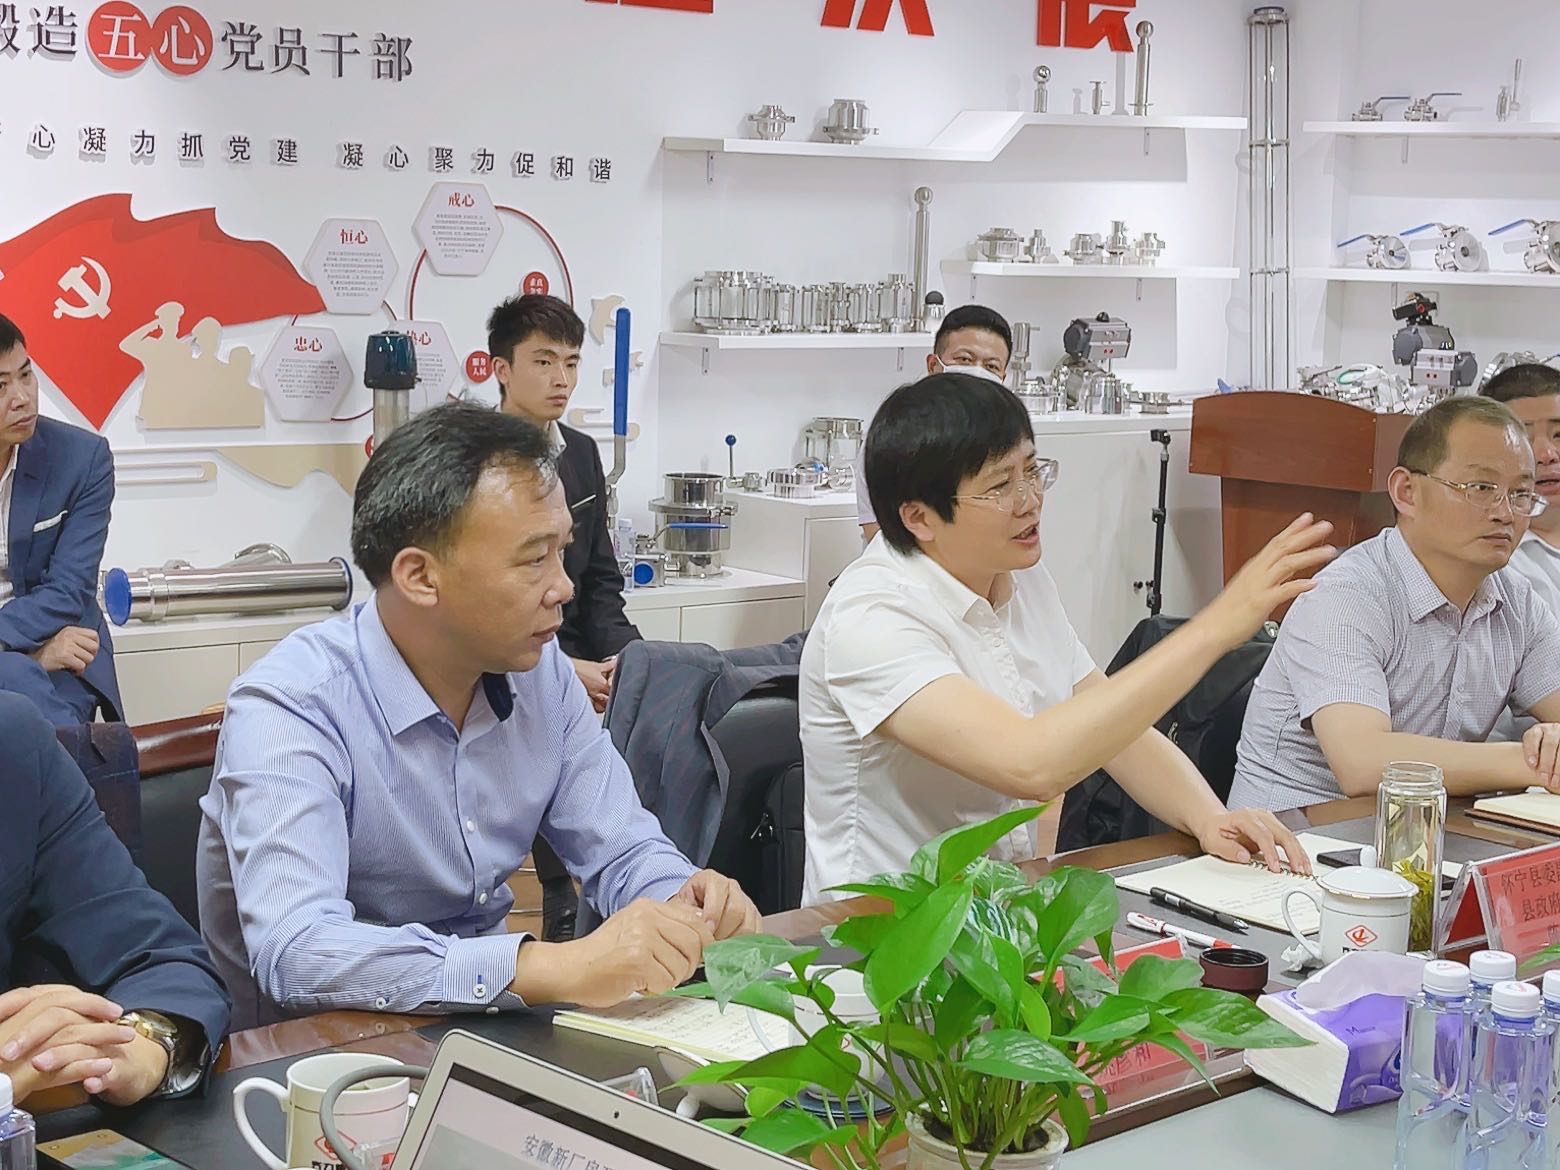 The head of Huaining County, Anhui Province--Chen Hong and other leaders visited the Wenzhou headquarters of Qili Group